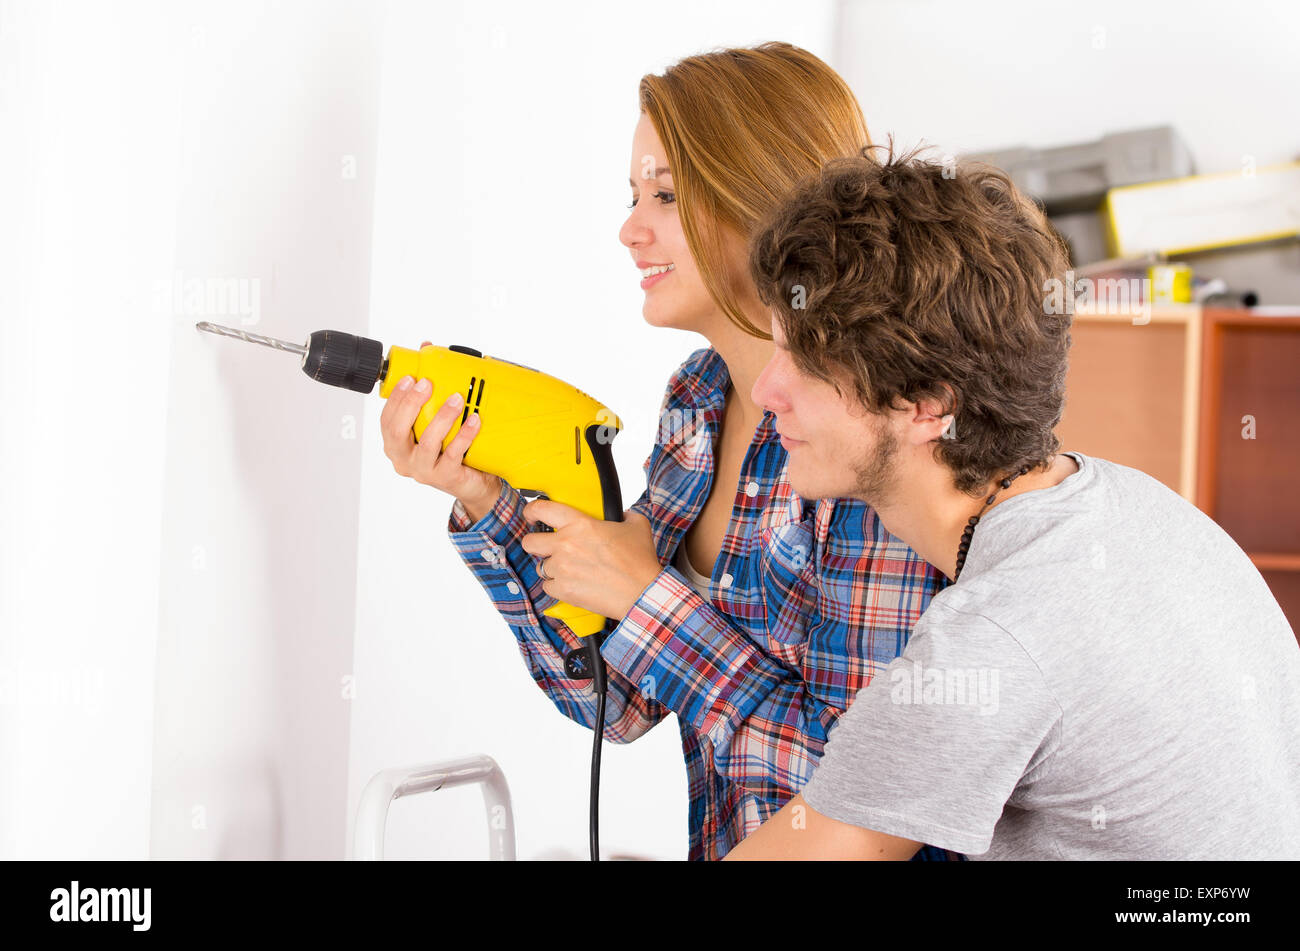 Couple renovating together as woman using power drill on wall with man standing next to her observing Stock Photo